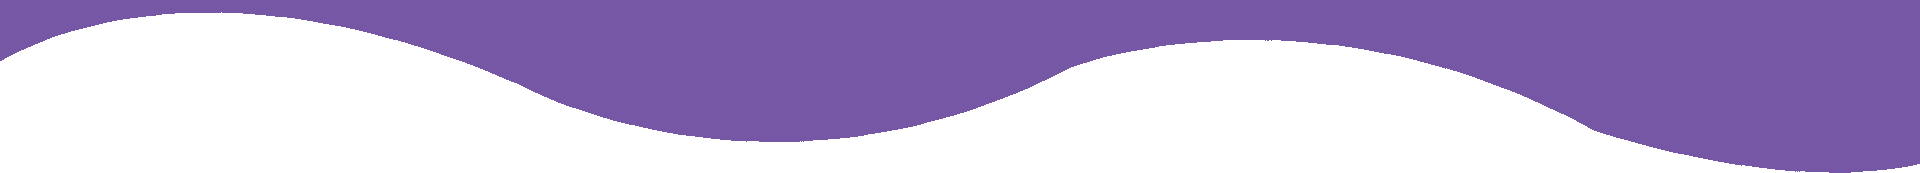 A purple and green background with a wave